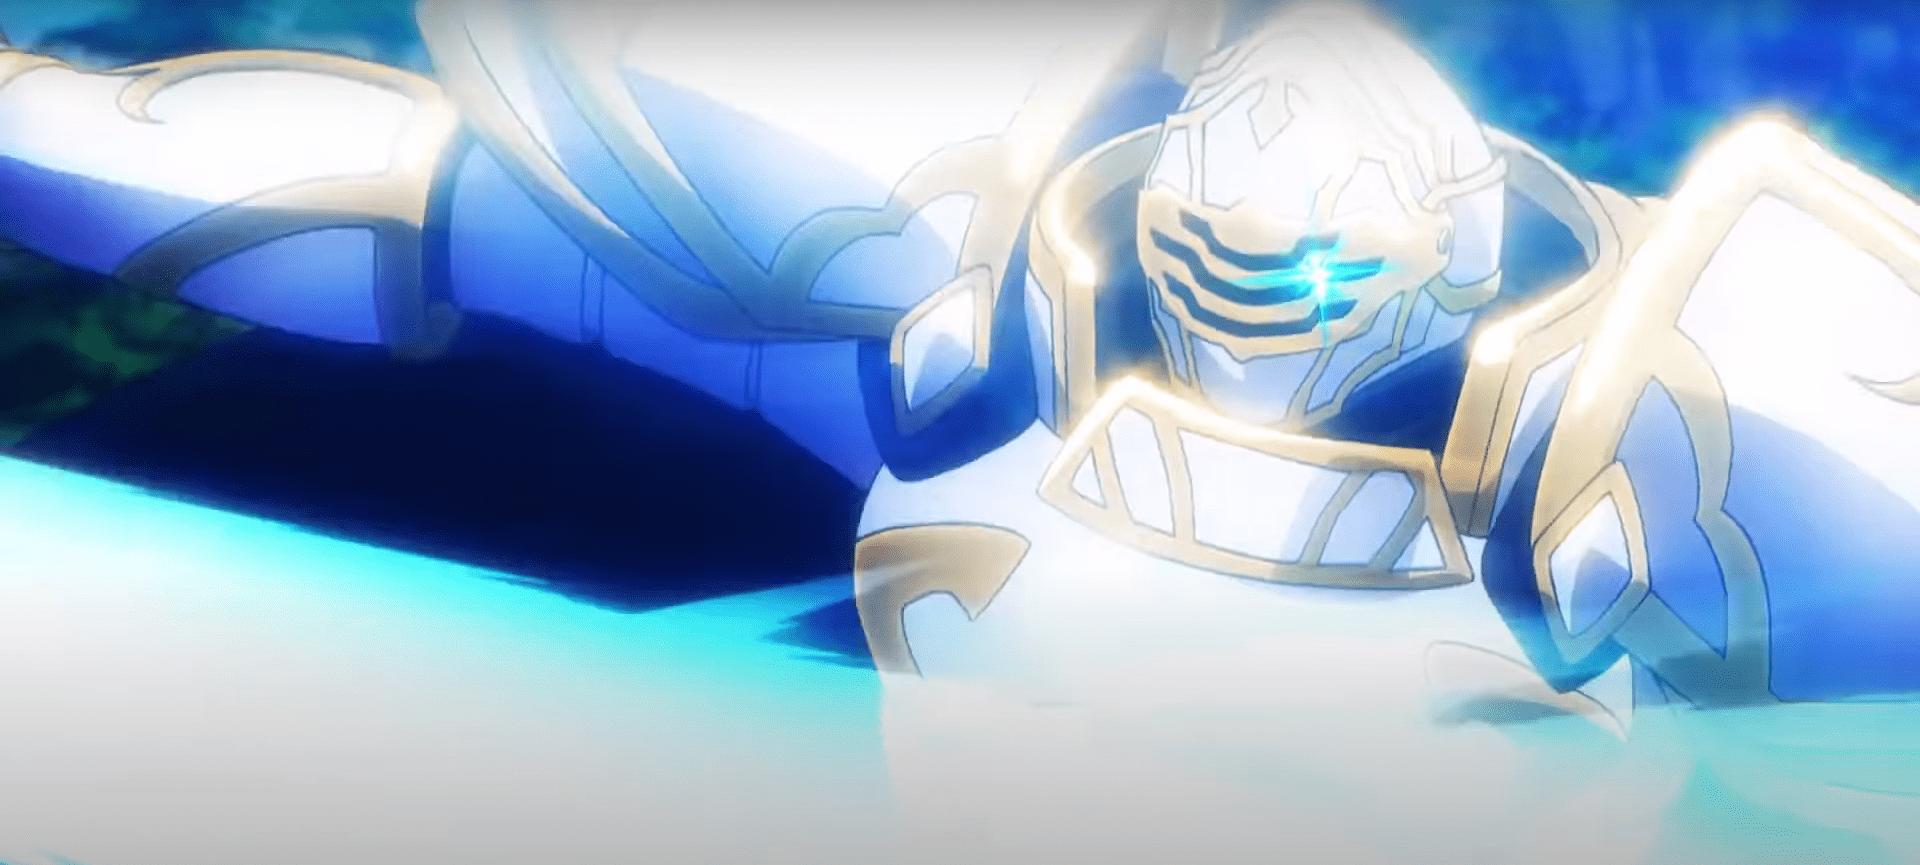 Skeleton Knight Anime Announces April 7 Premiere in New Video